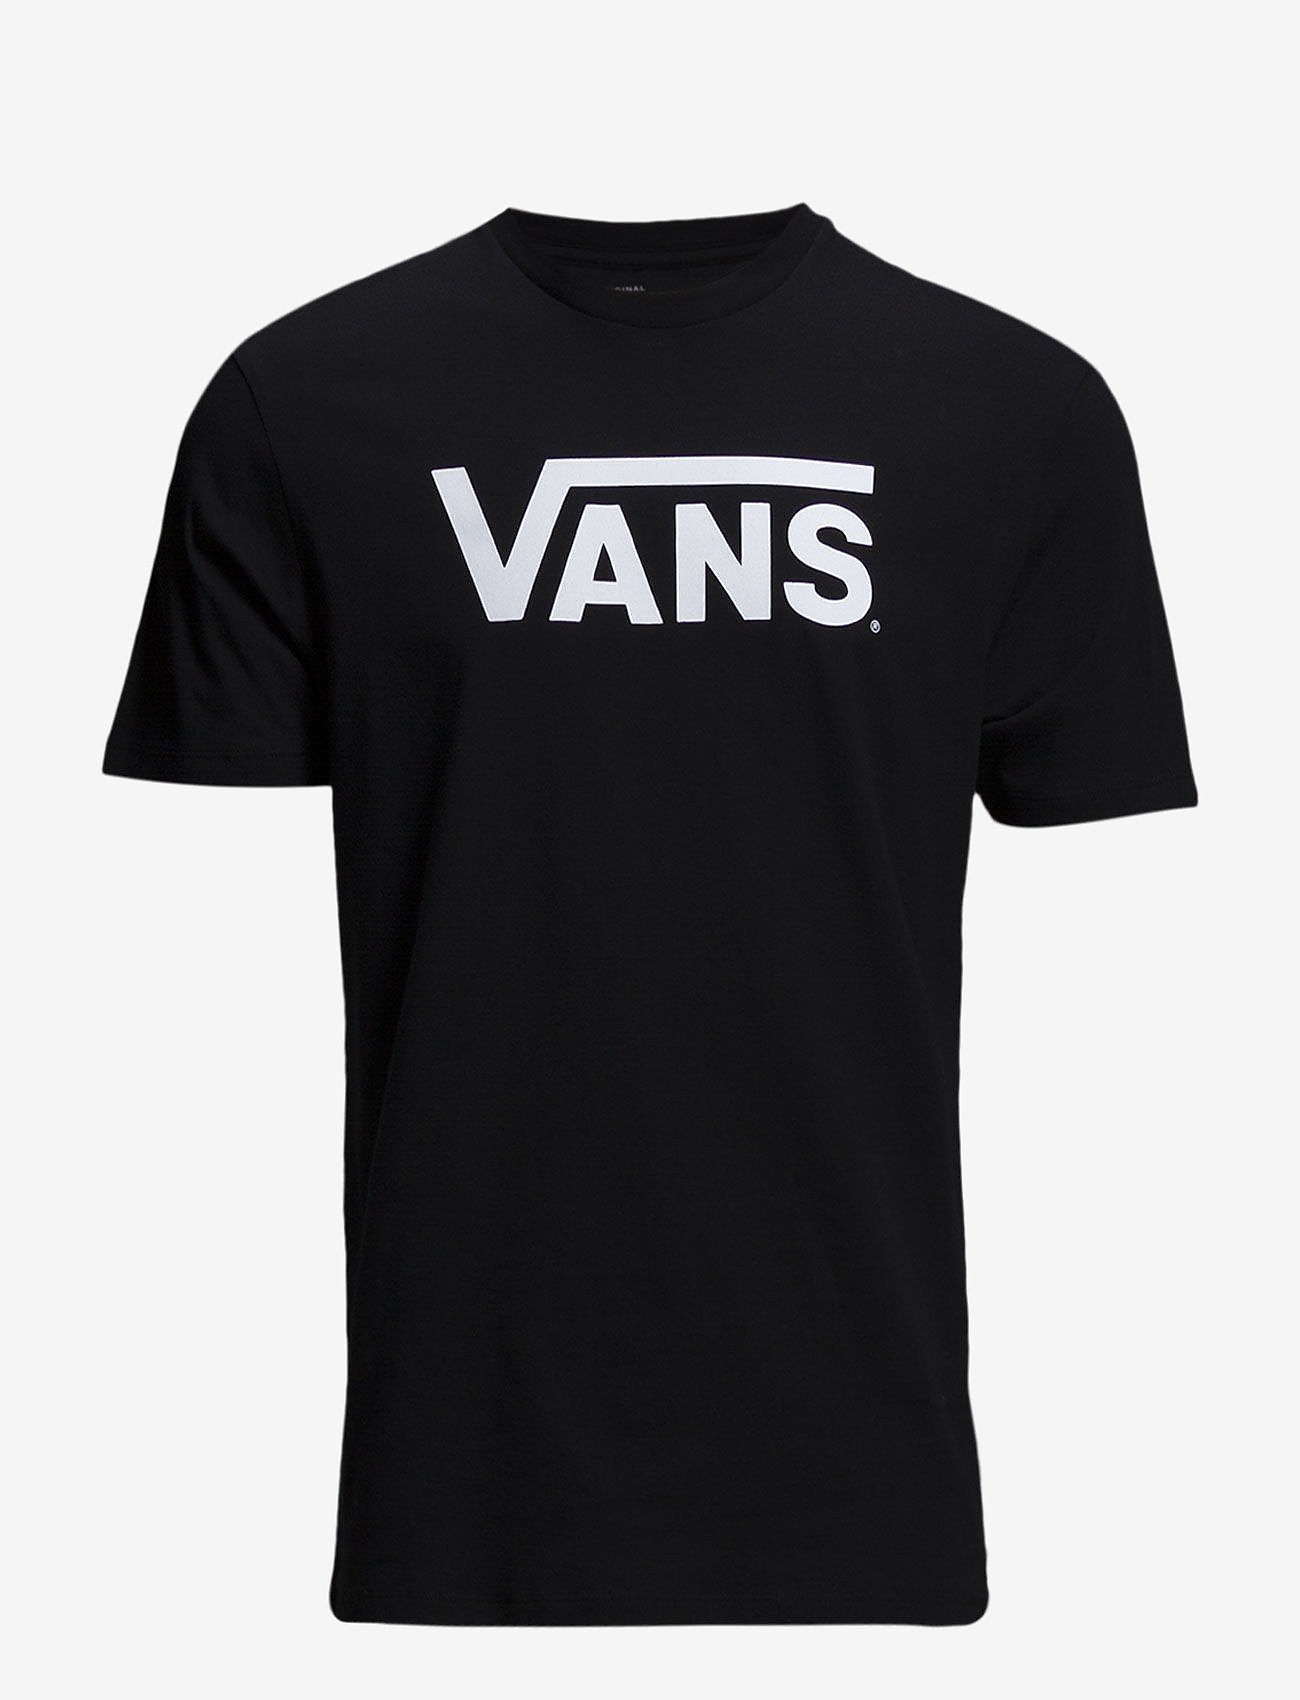 vans black and white top